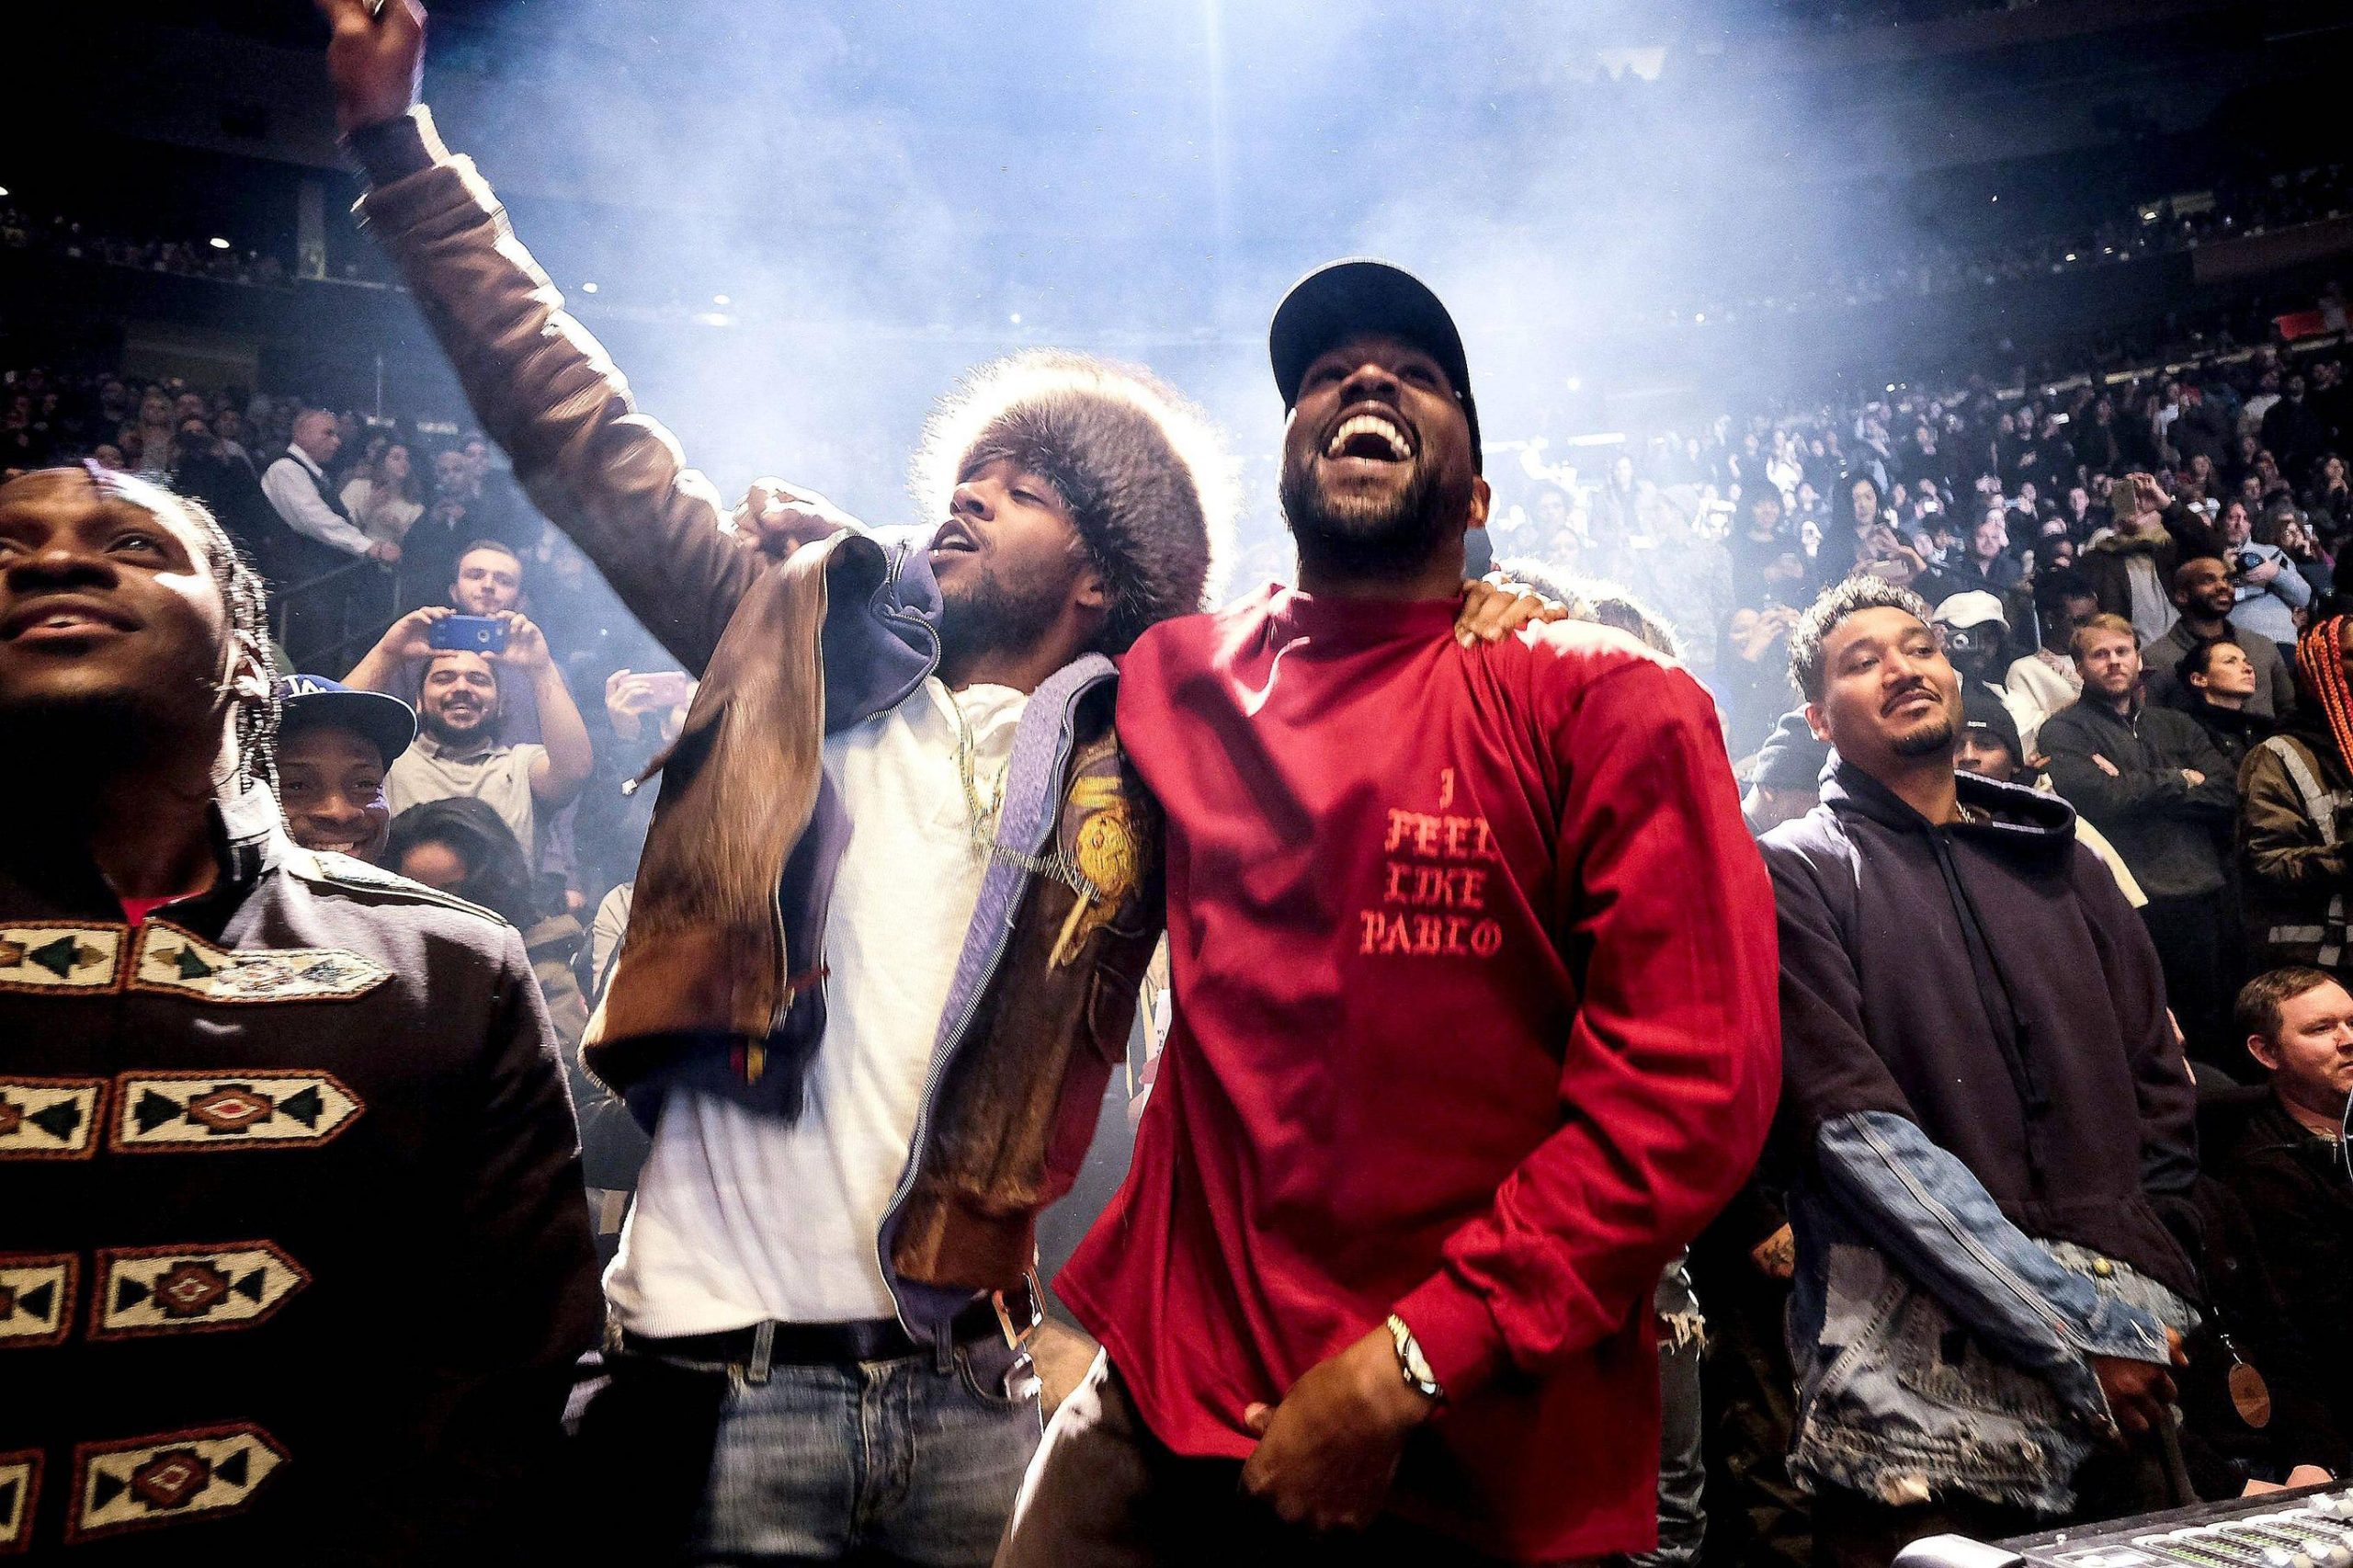 Kanye West and Kid Cudi: The Highs, Lows, and the 800M Spotify Triumph from 'The Life of Pablo'